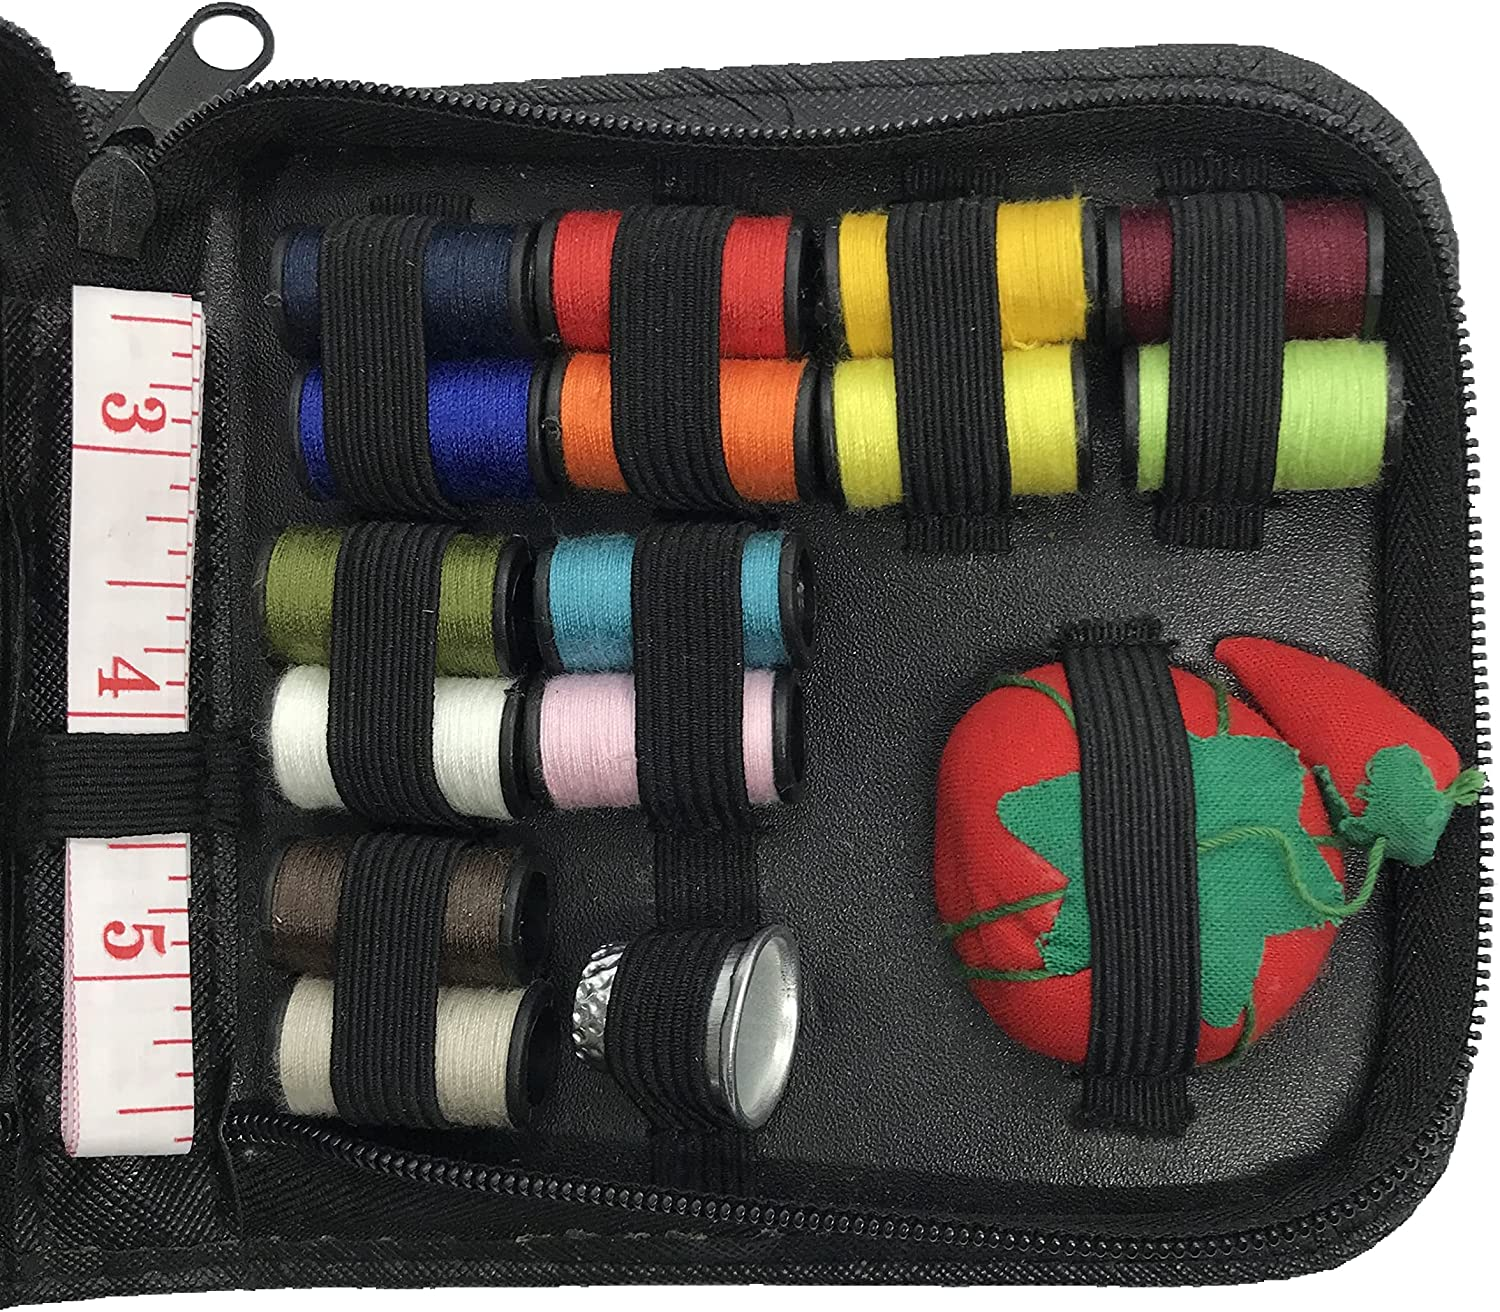 Sewing Kit,Sewing KIT for Adults 